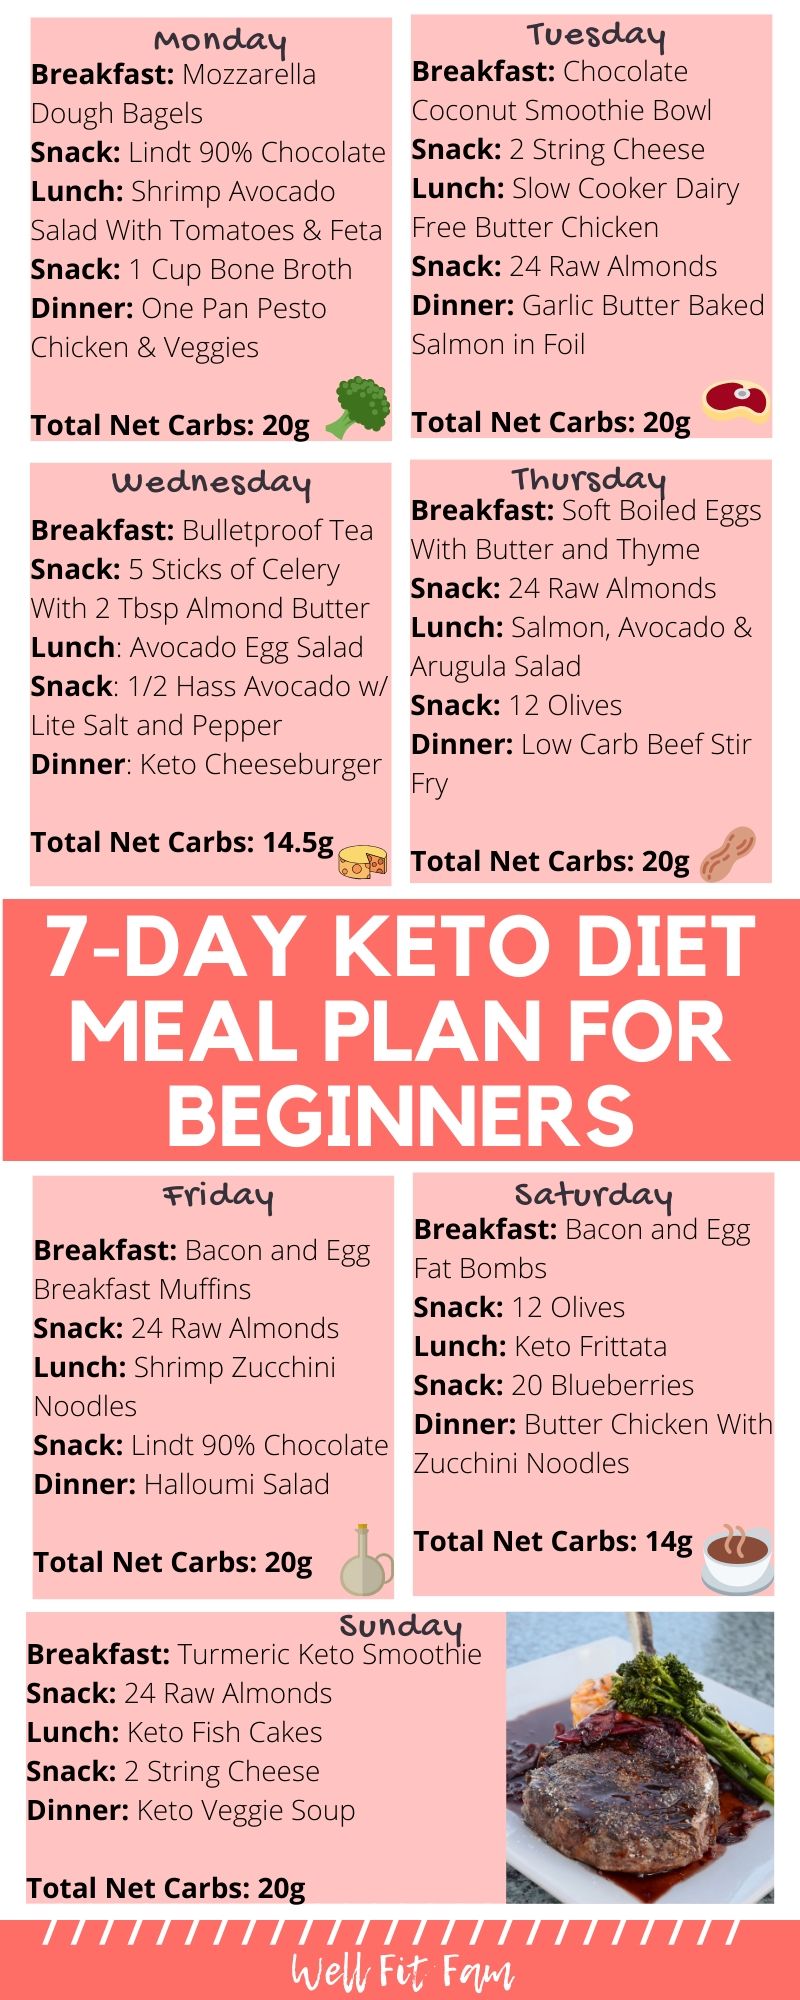 How To Plan A Meal For Keto Diet Per1200 Calories